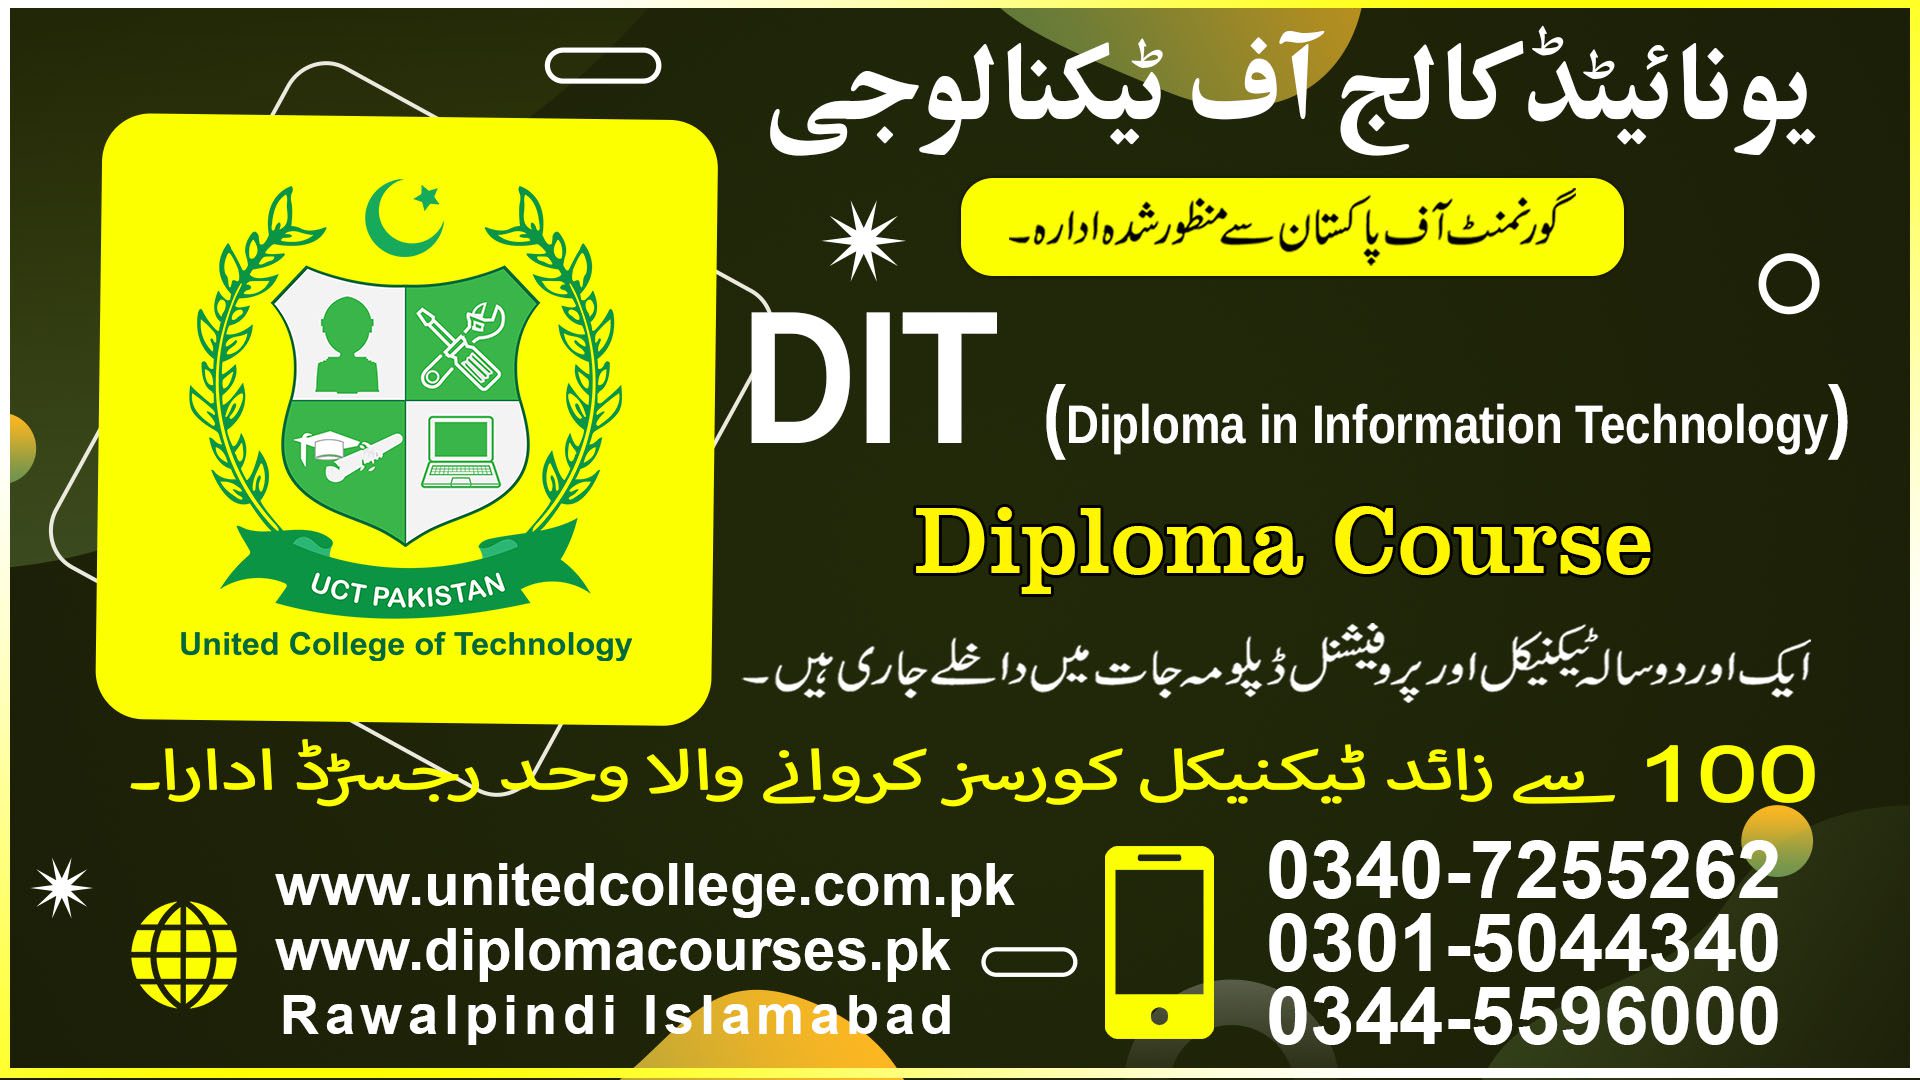 DIT (DIPLOMA IN INFORMATION TECHNOLOGY) COURSE